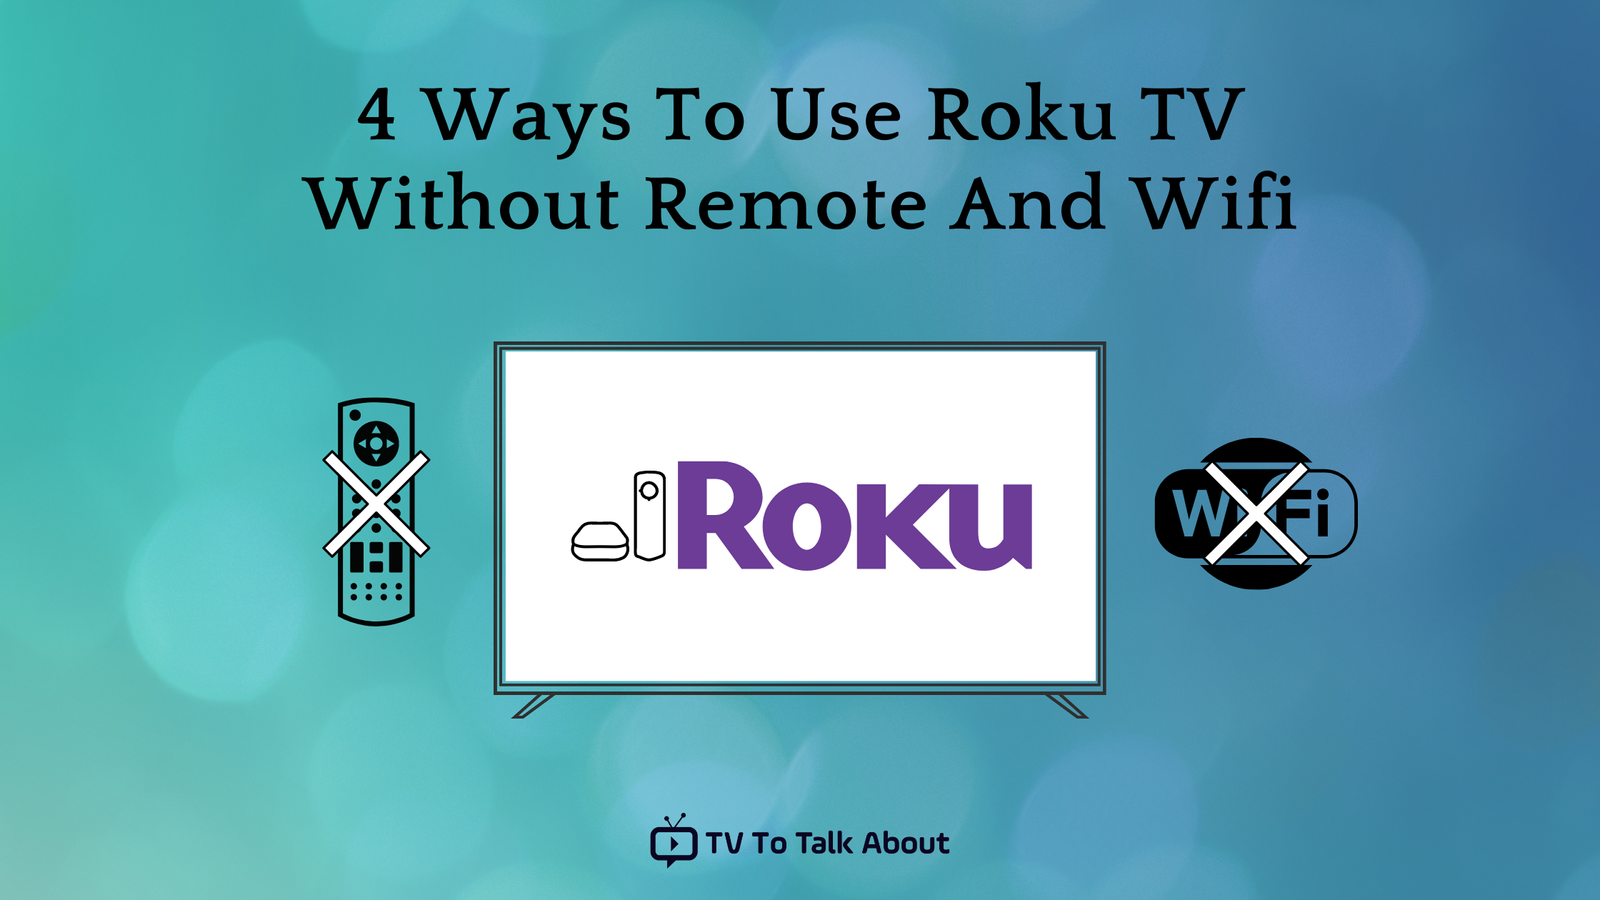 How to Use Roku TV Without Remote And Wifi